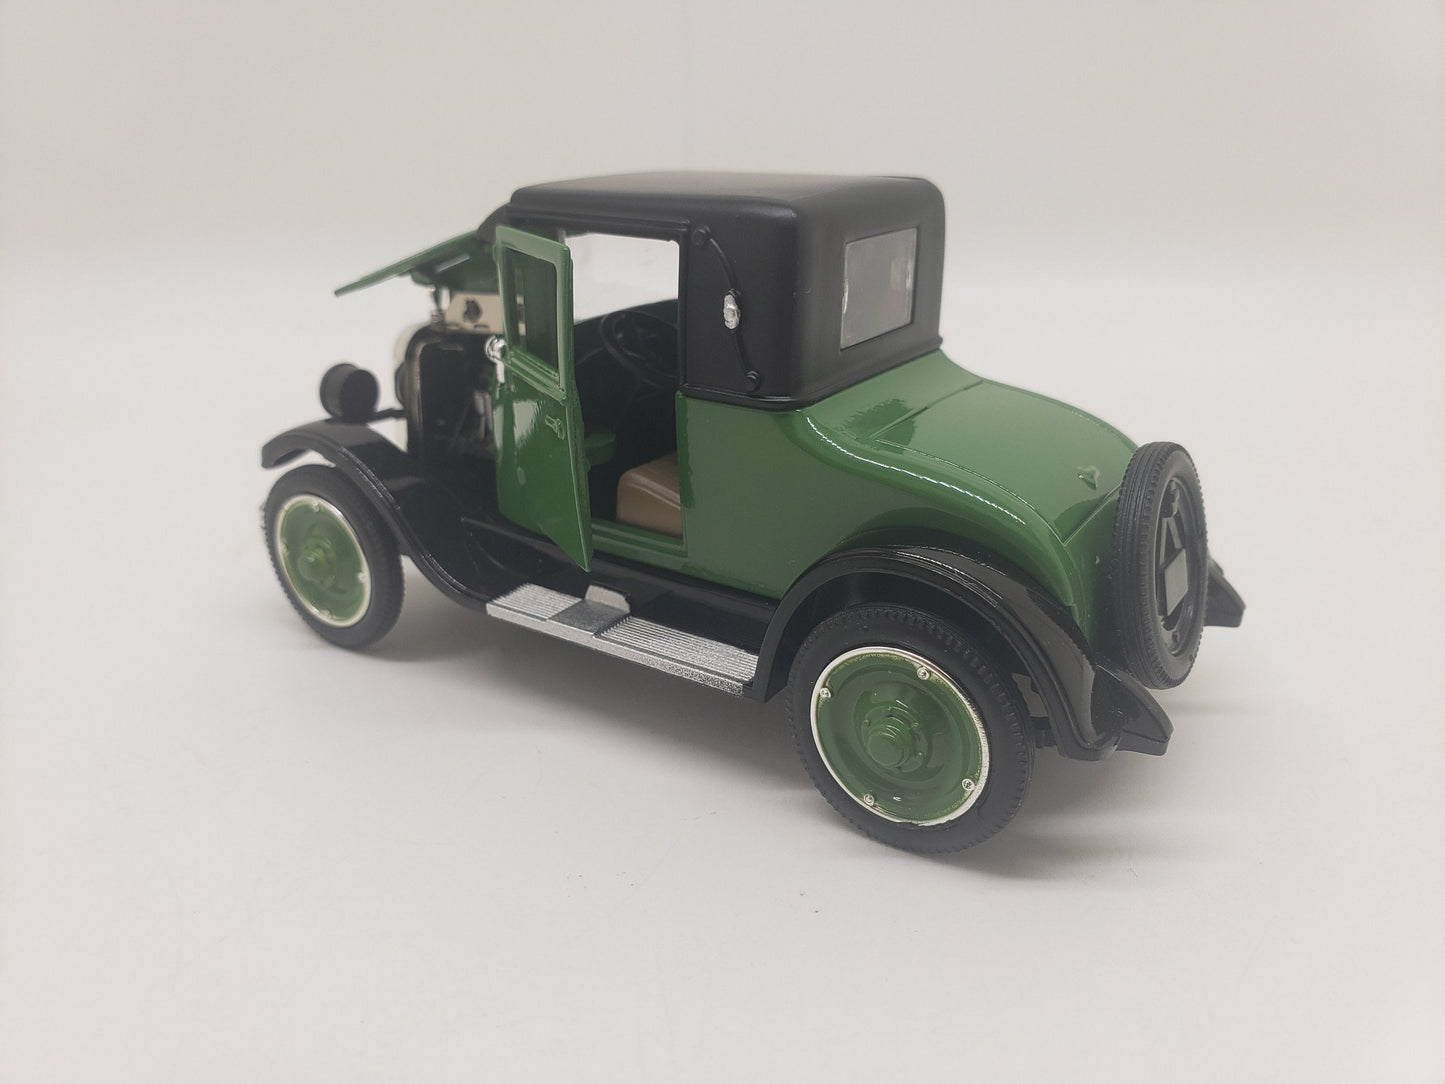 1926 Chevy Superior V2 Passenger Coupe Green New Ray Collectable 1:32 Scale Miniature Model Toy Car Perfect Birthday Gift